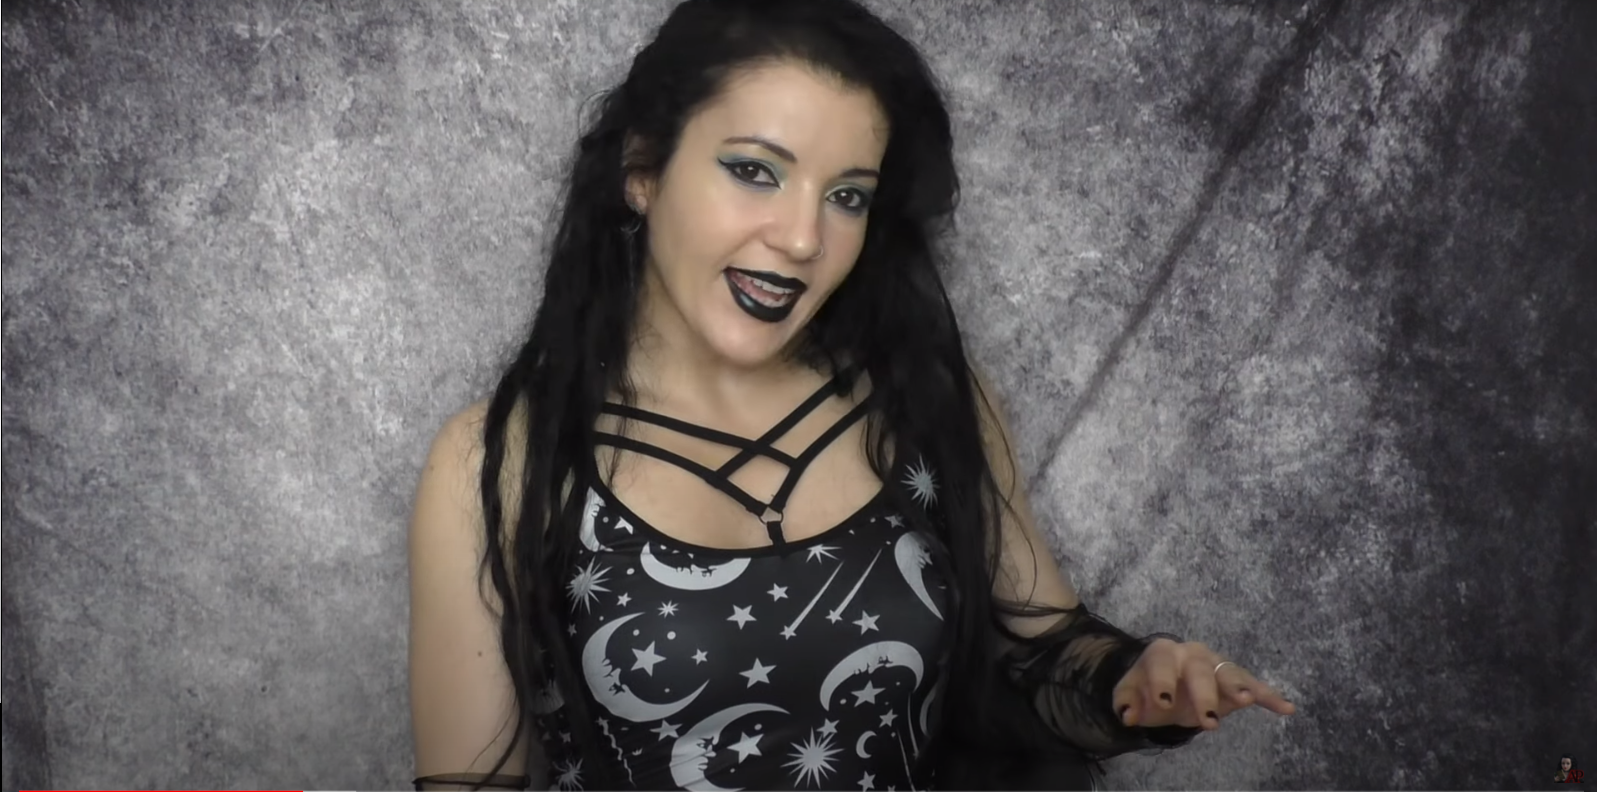 Angela Puca wearing a moon and stars black top with strapes shaped as a pentagram